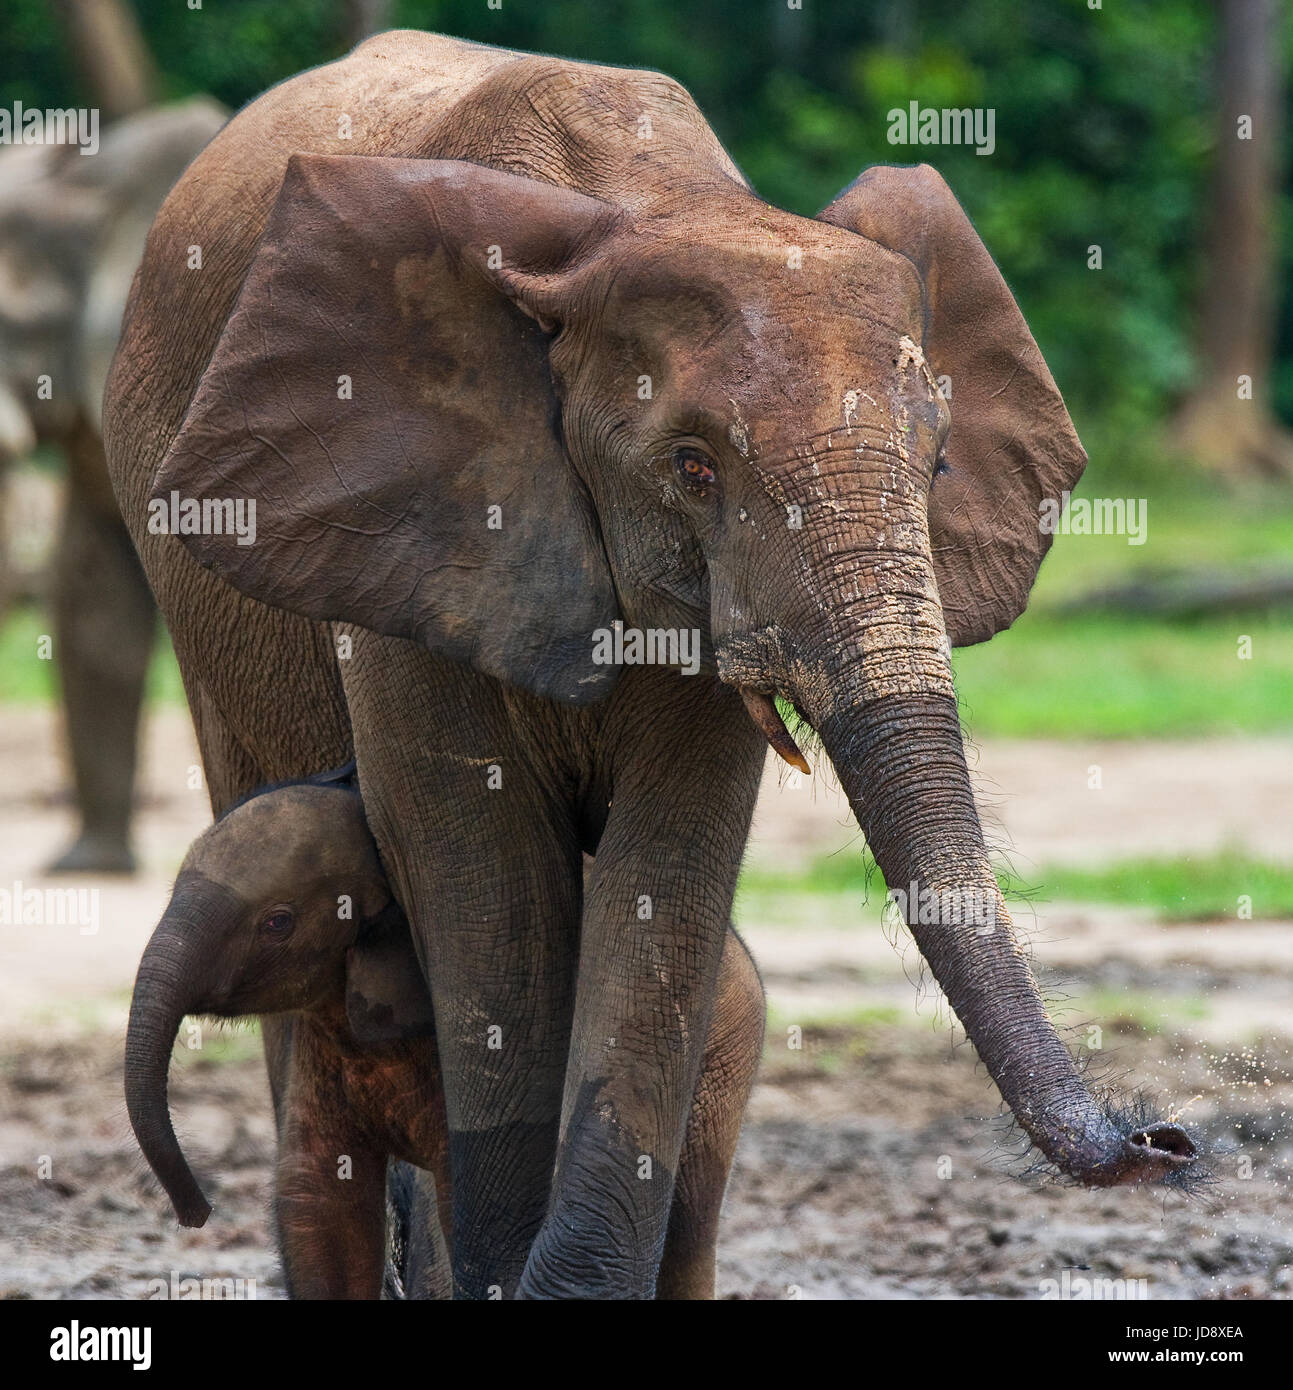 Female elephant with a baby. Central African Republic. Republic of Congo. Dzanga-Sangha Special Reserve. Stock Photo